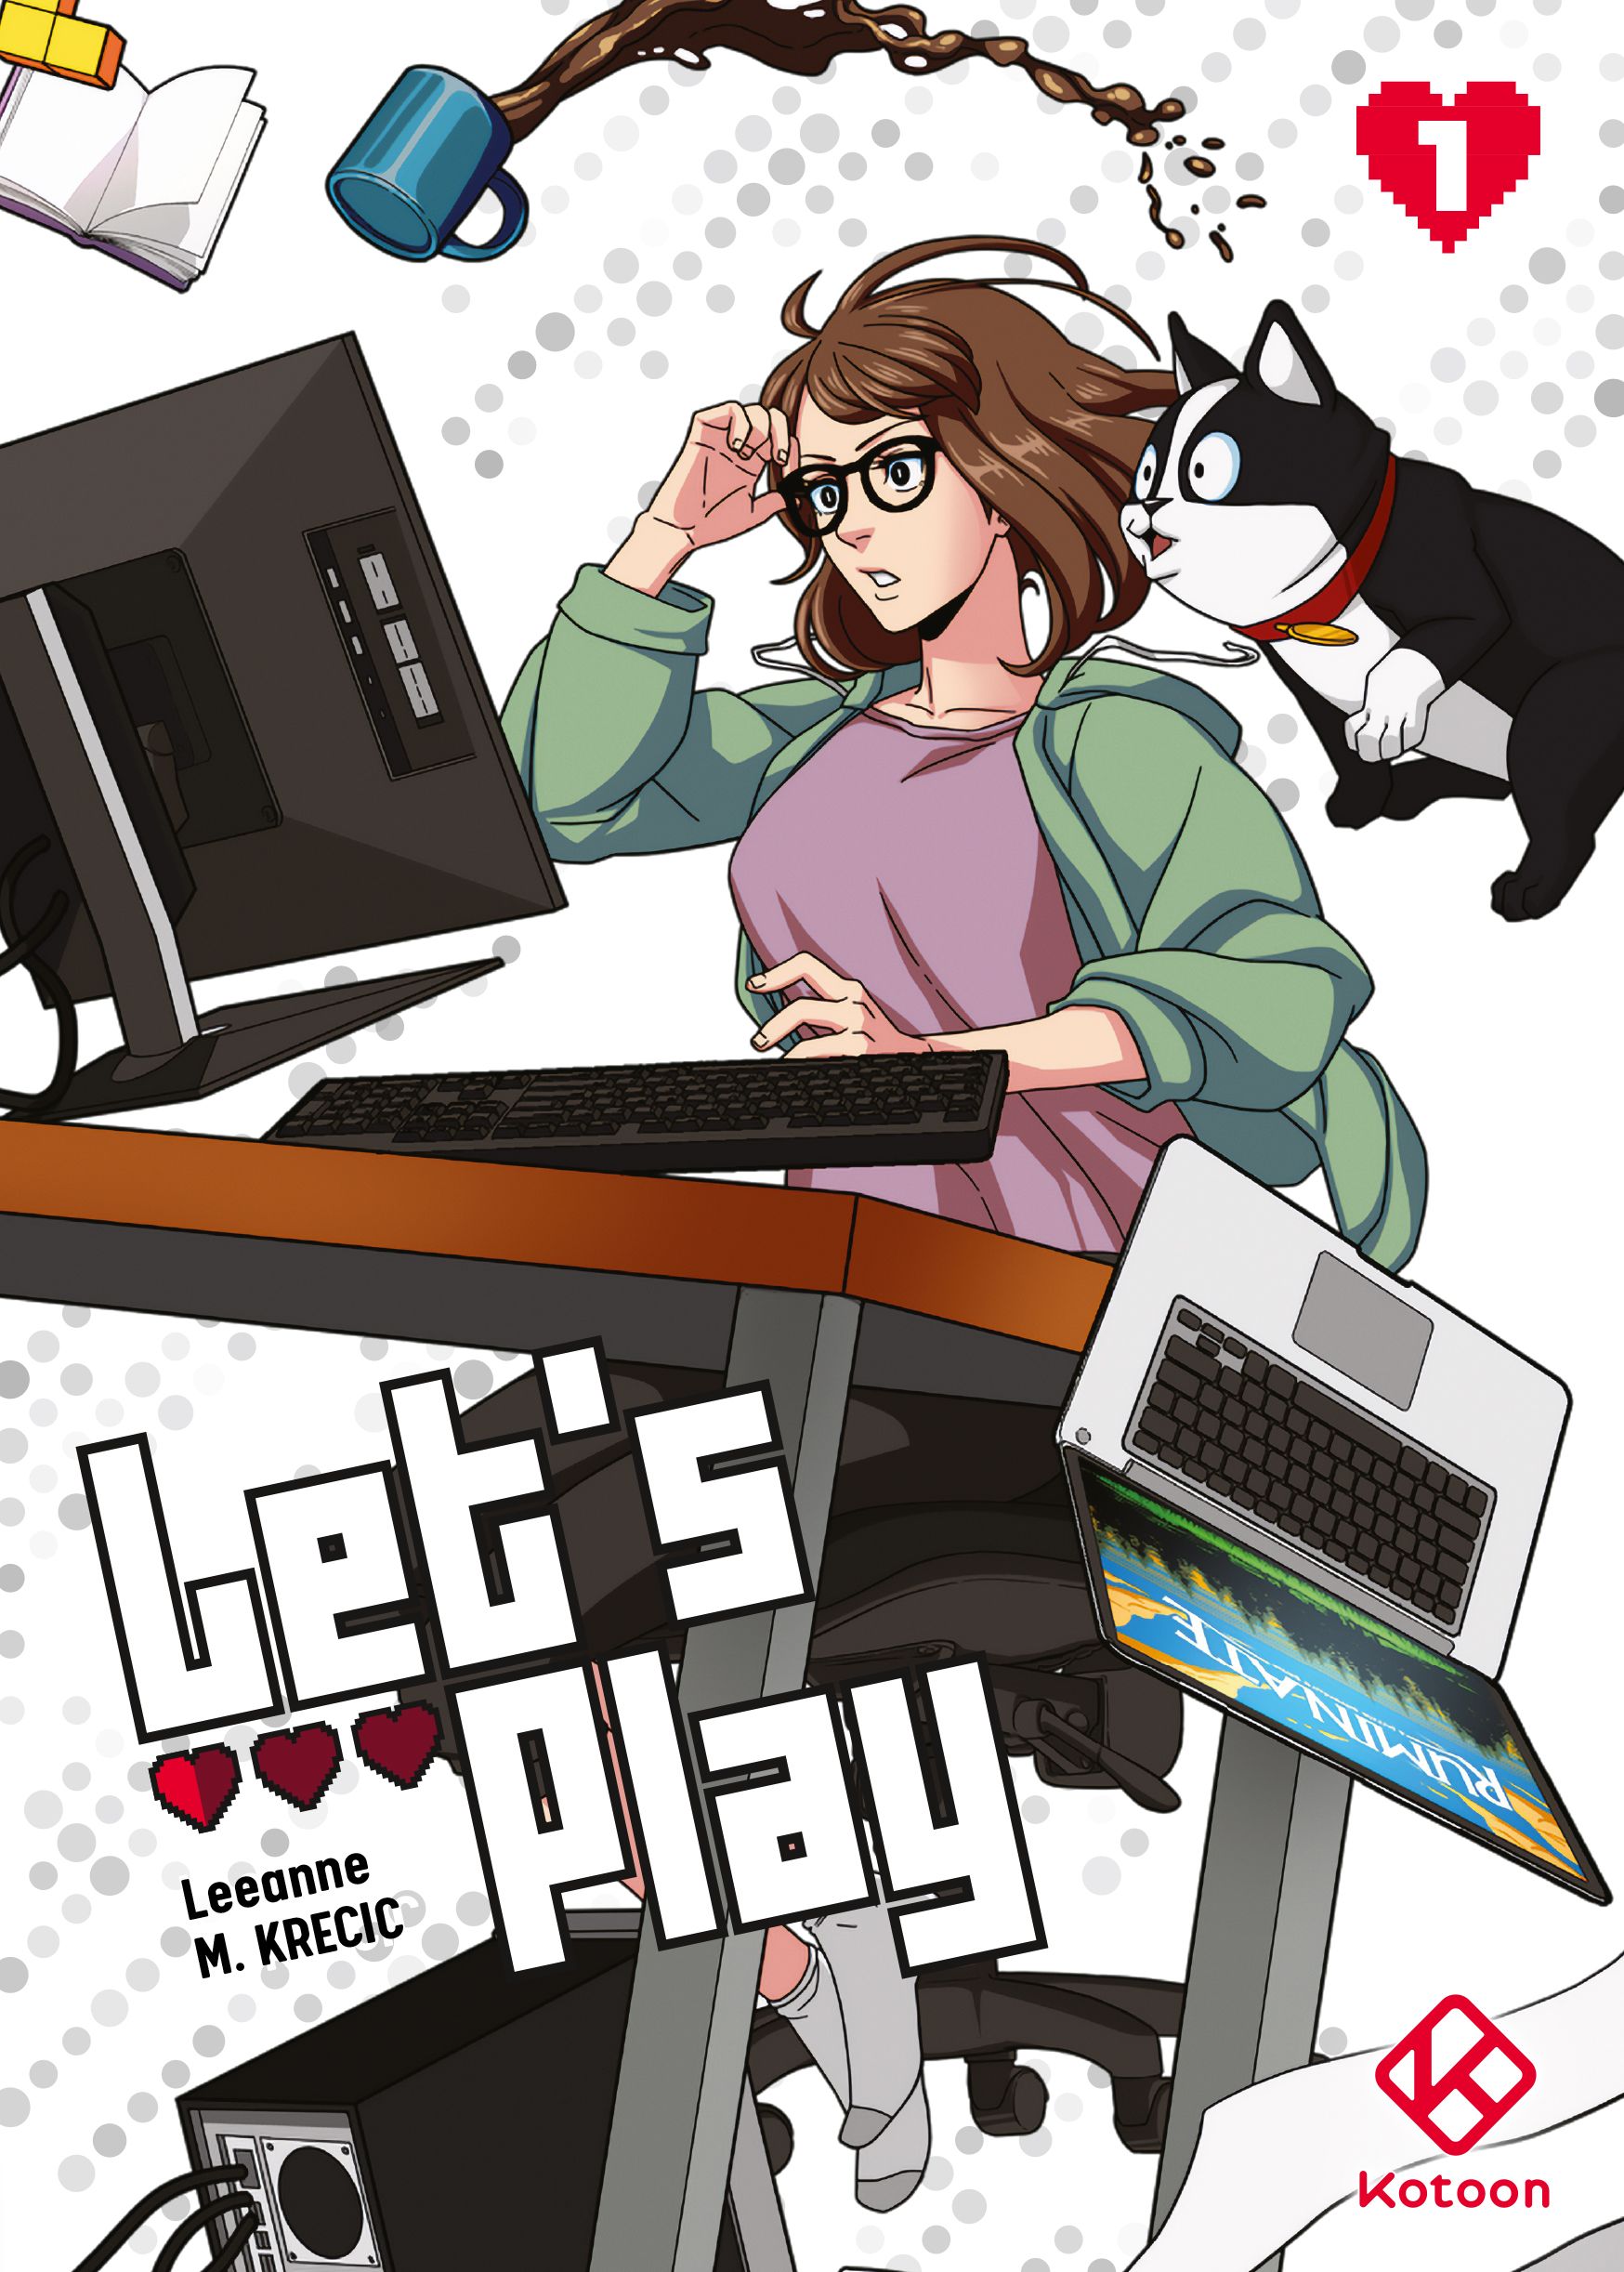 Let's Play 1 Kotoon